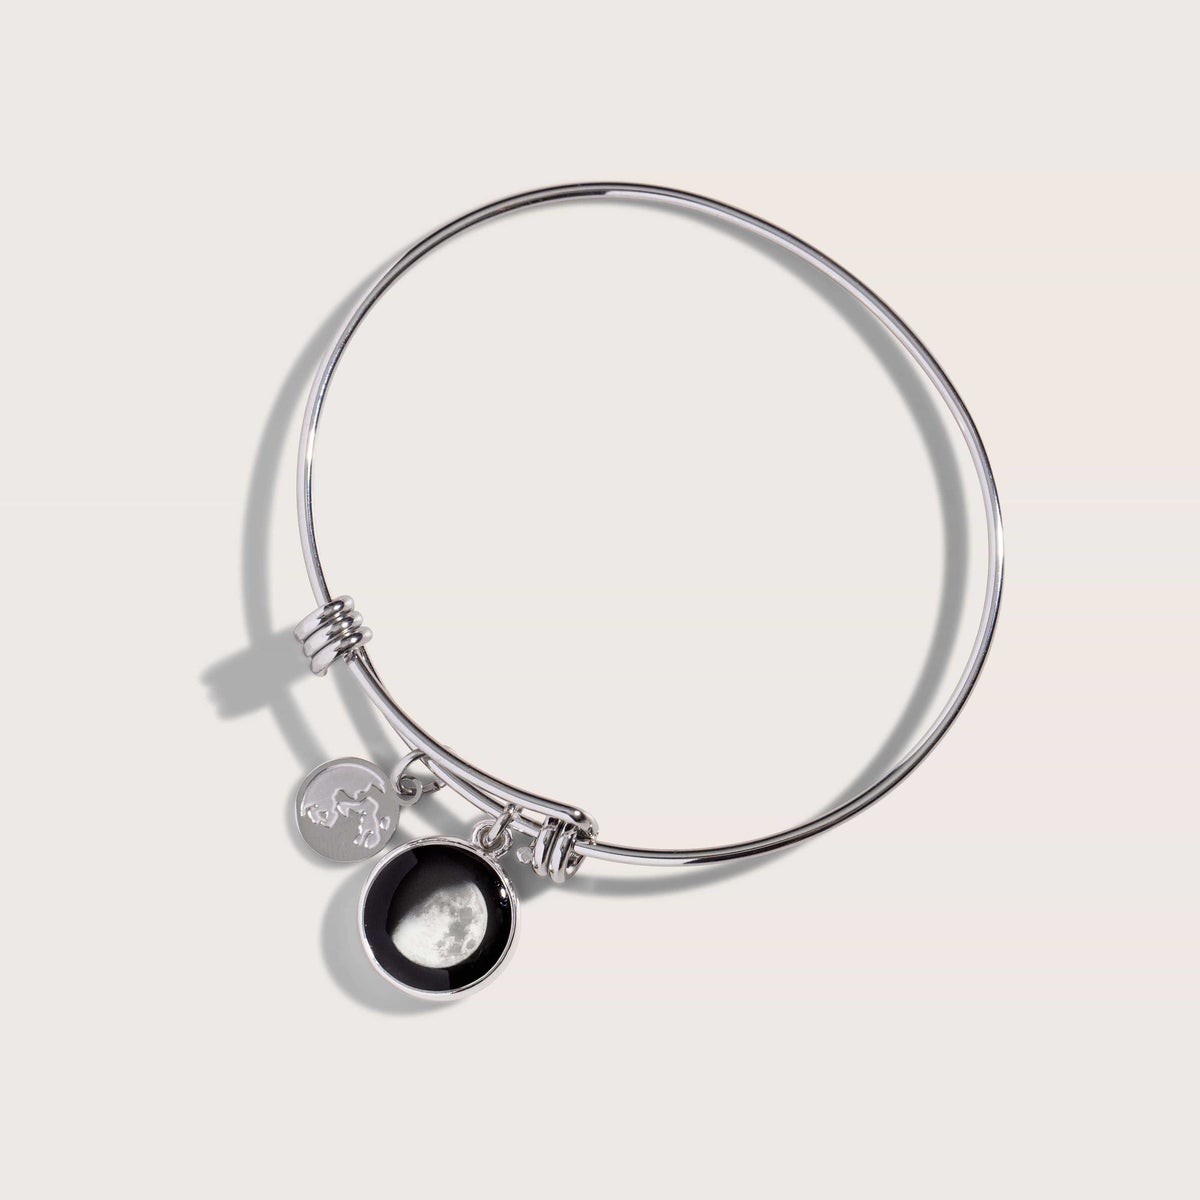 Modern Moon Bangle in Stainless Steel